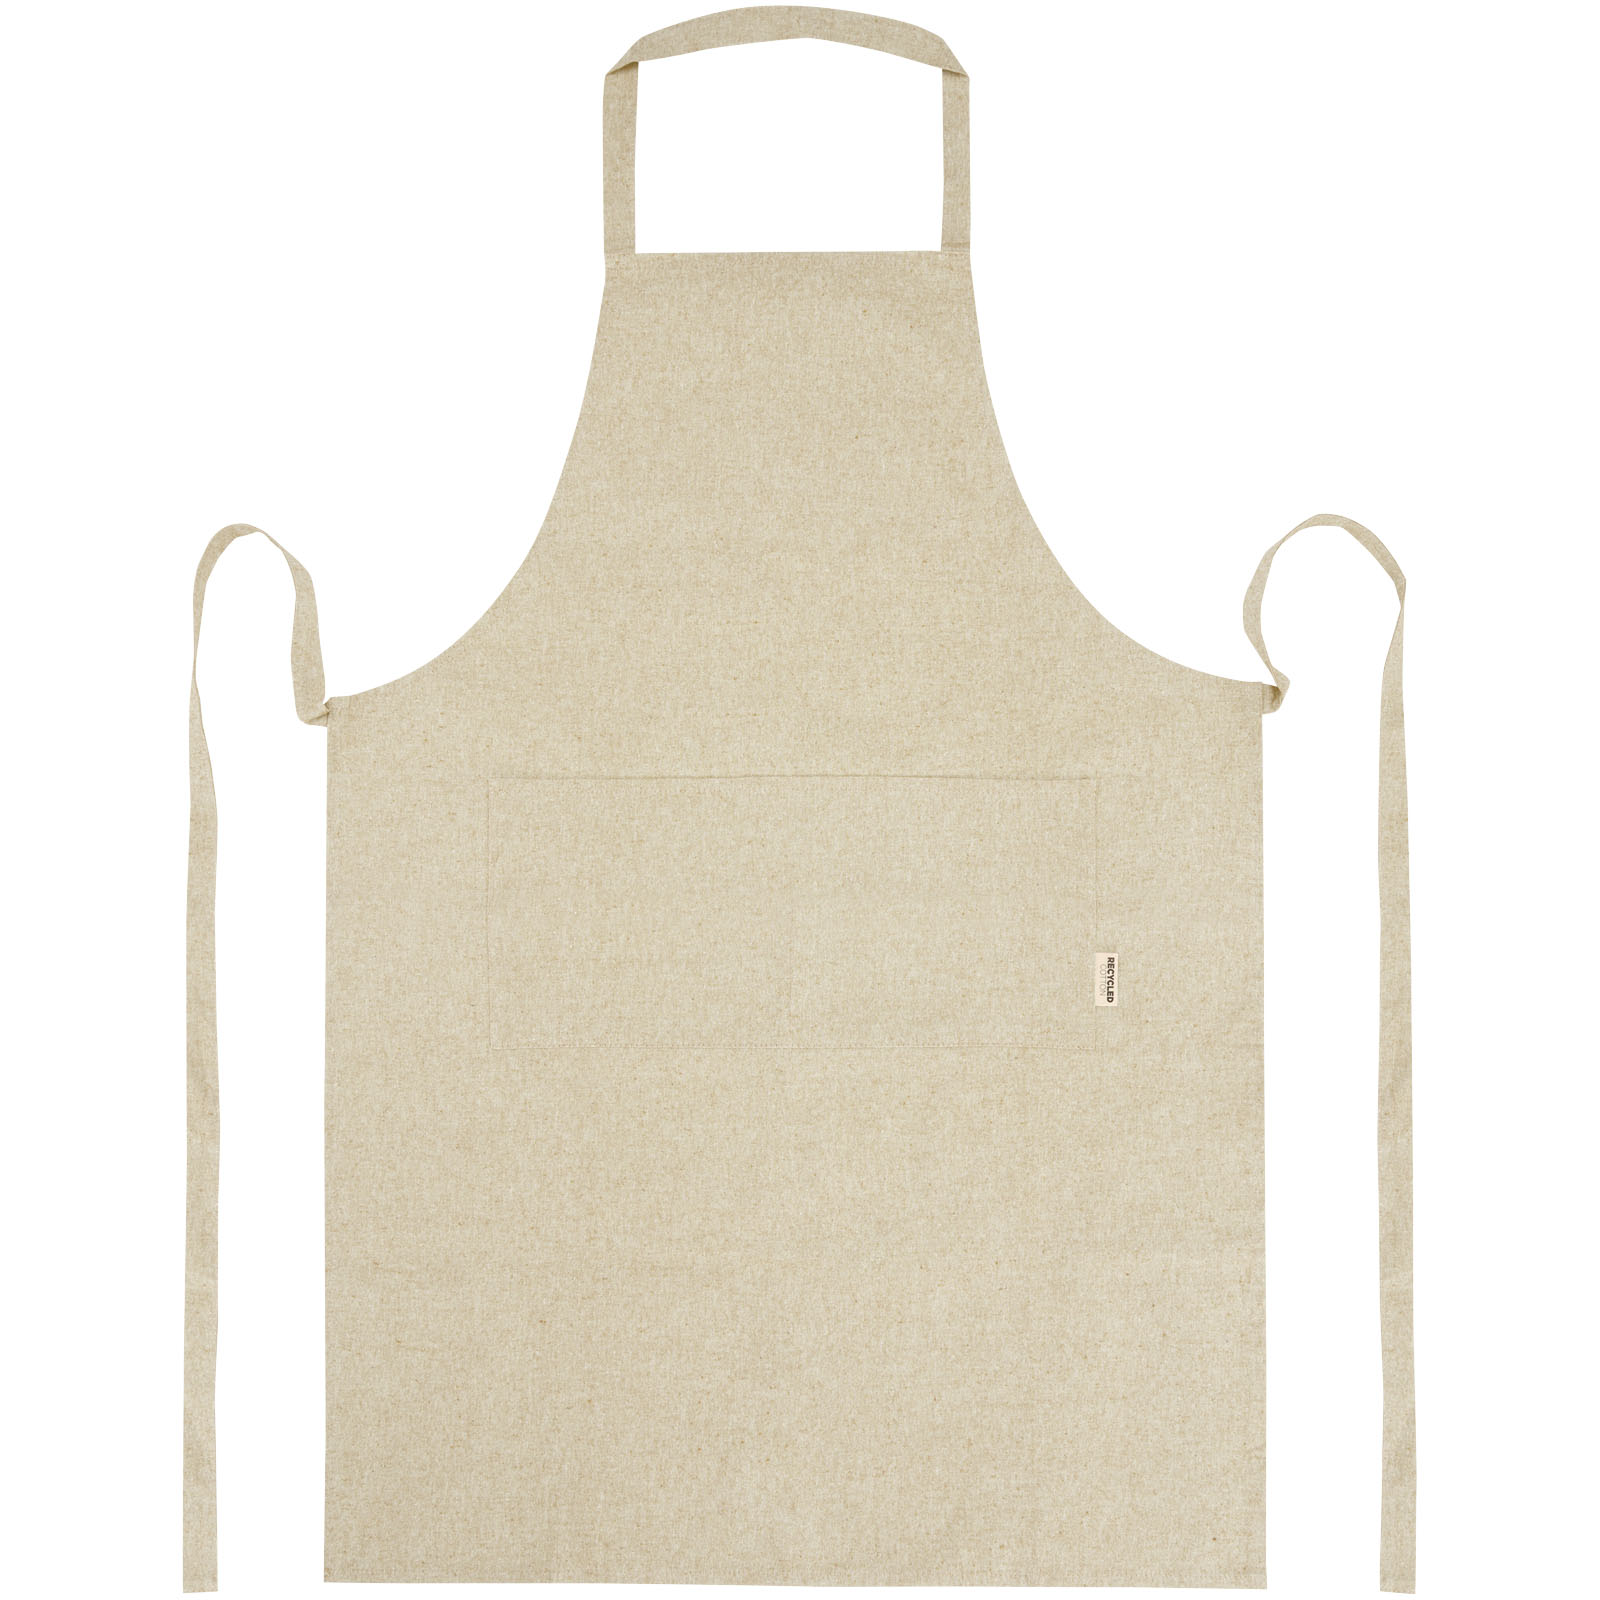 Advertising Aprons - Pheebs 200 g/m² recycled cotton apron - 1